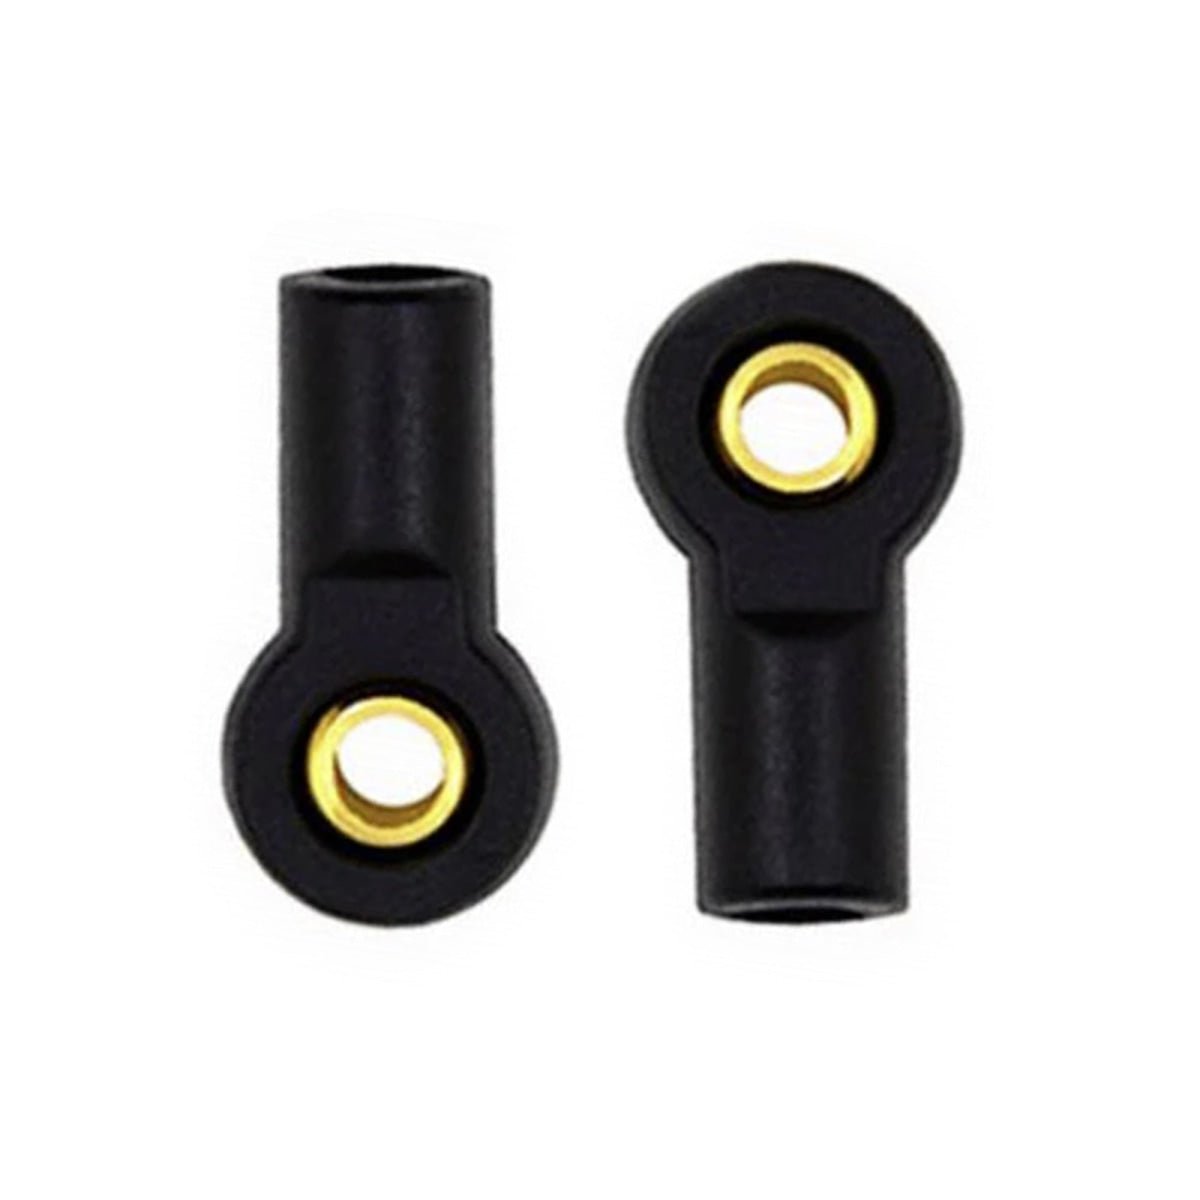 2/10x M3 Ball Head Plastic Link End Holder Tie Rod End Hole For RC Car Buggy Crawler Car 18mm - 2pcs - - Asia Sell